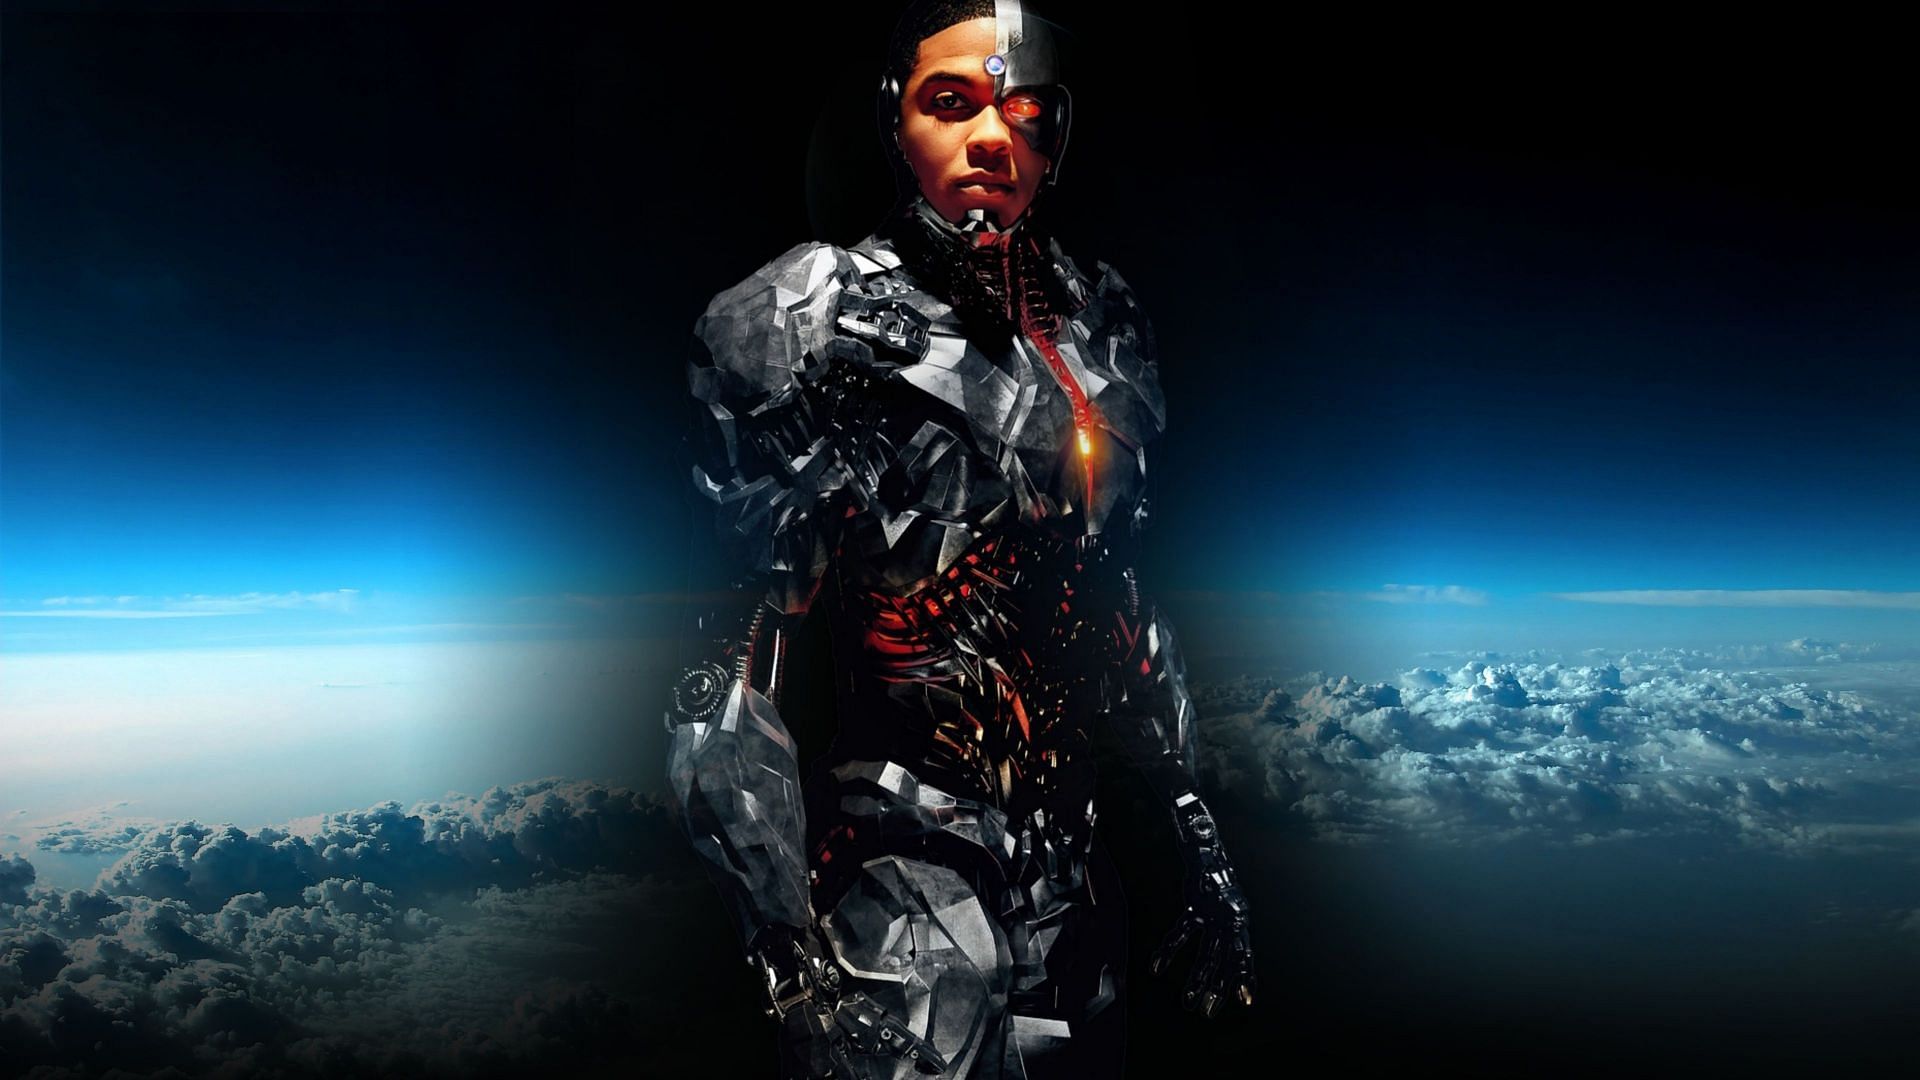 While Cyborg&#039;s exterior may be robotic, his inner self is much more akin to humanity.(Image via DC Universe)